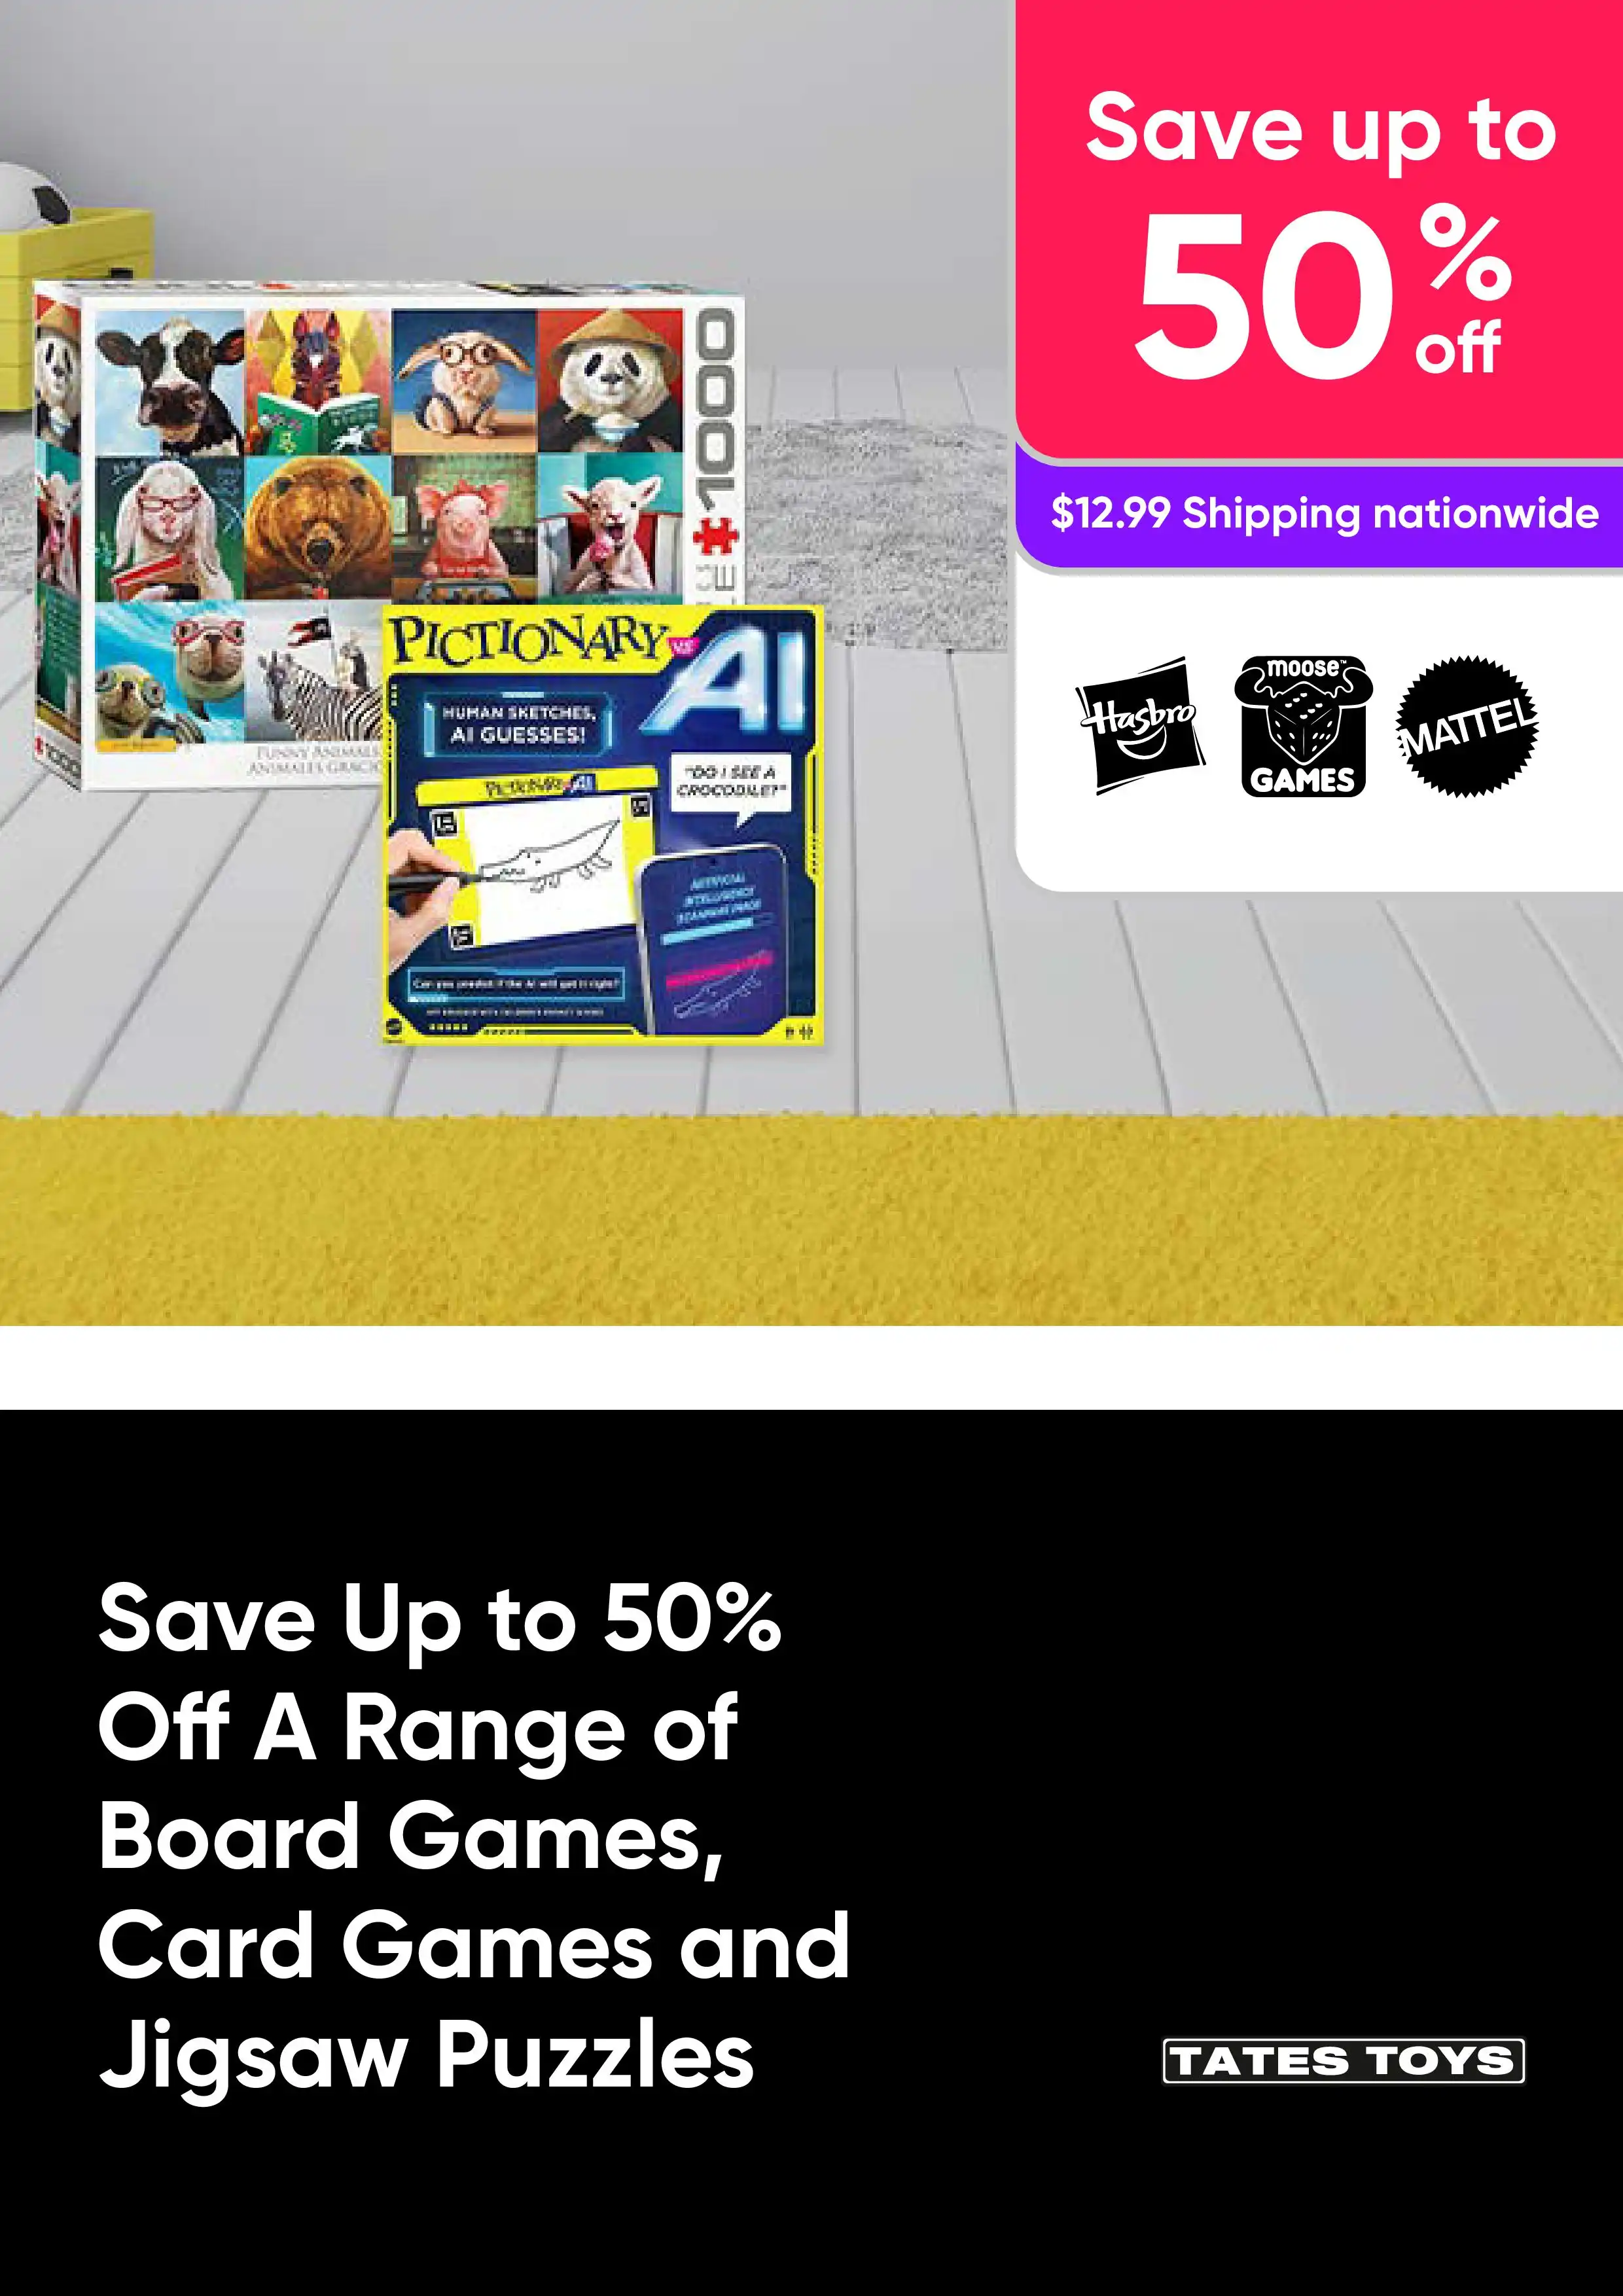 Save Up to 50% Off A Range of BoardGames, Card Games and Jigsaw Puzzles